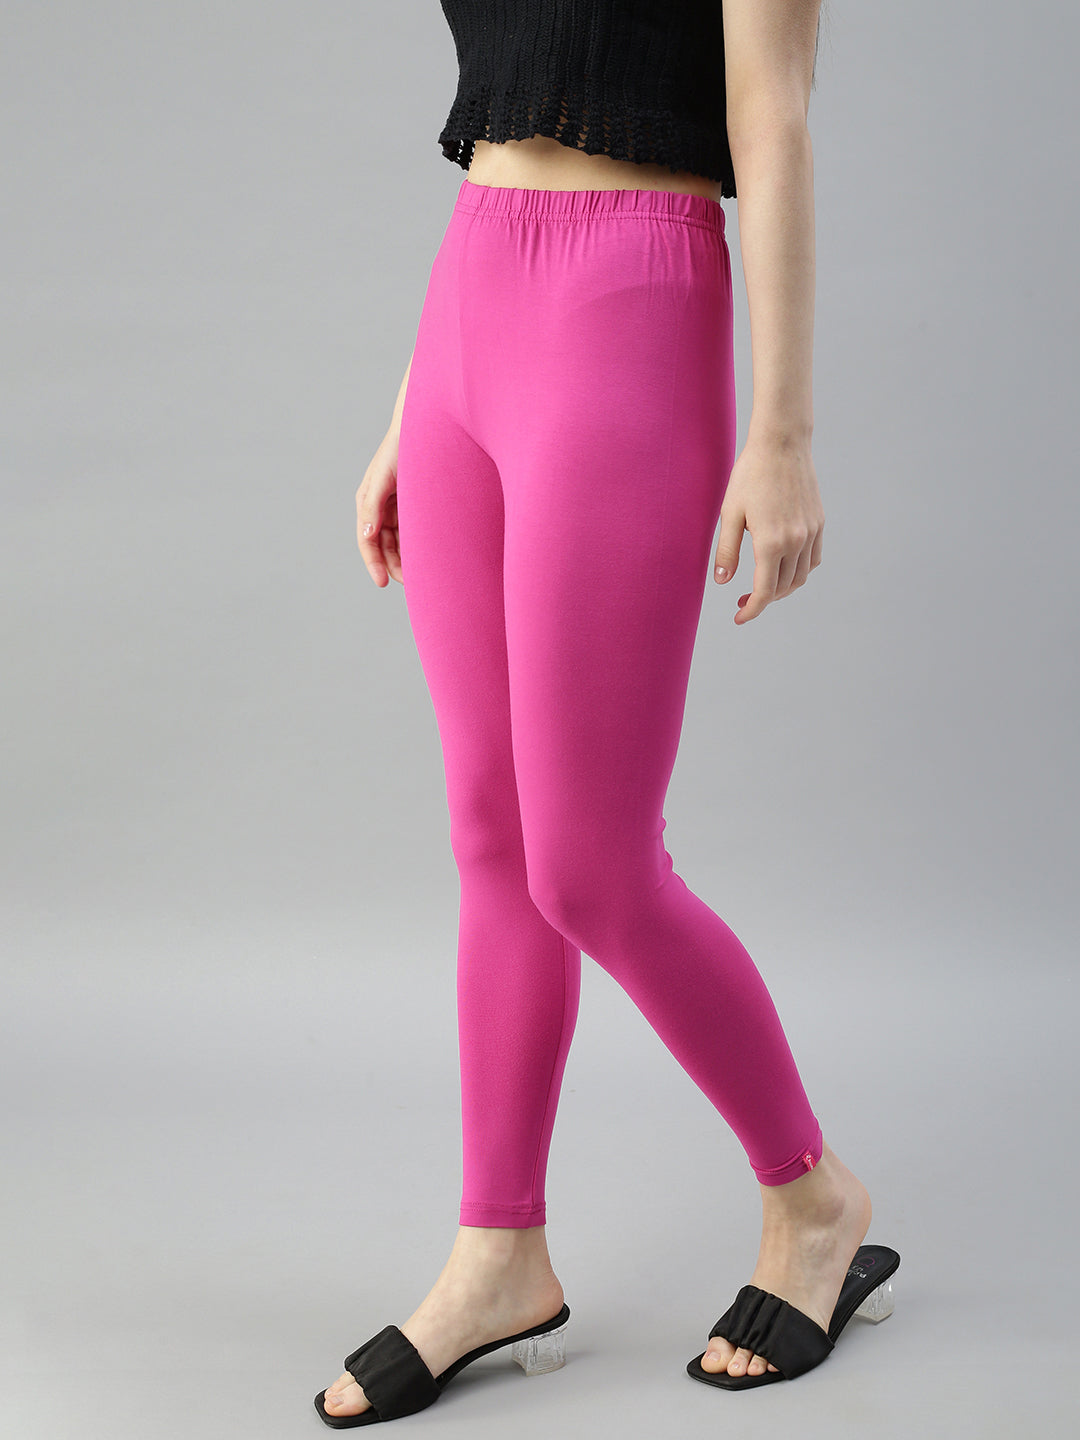 Pink 4 Way Ankle Length Ladies Leggings, Size: XL, Straight Fit at